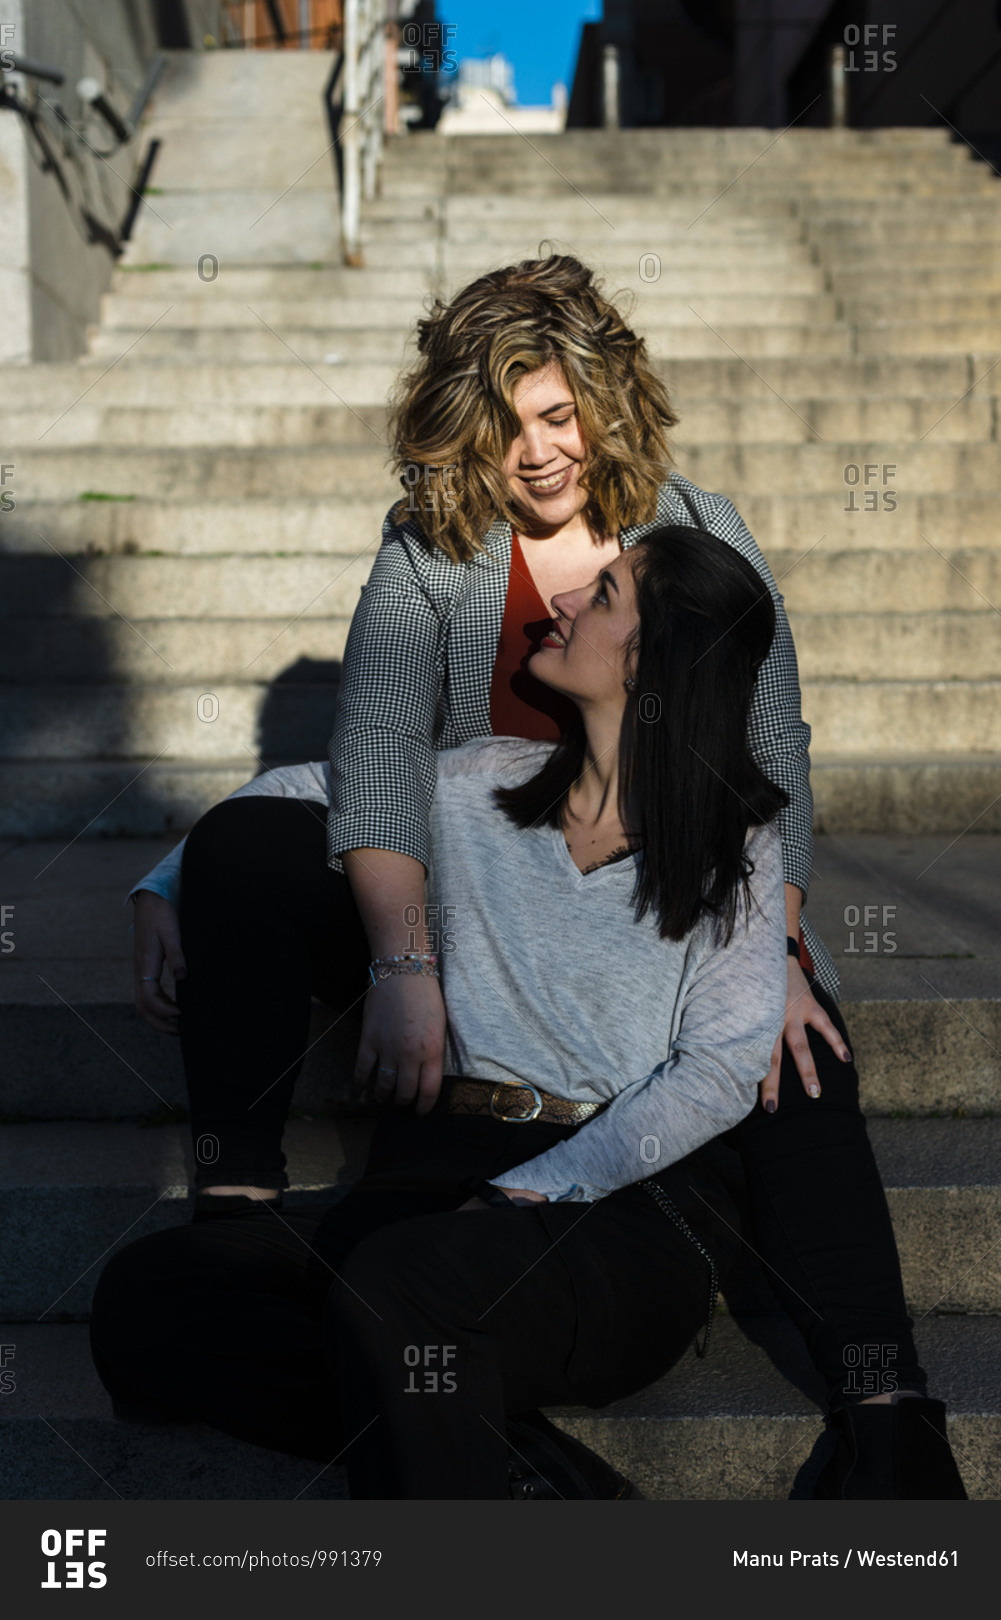 Lesbian couple looking at each other while sitting on steps in city